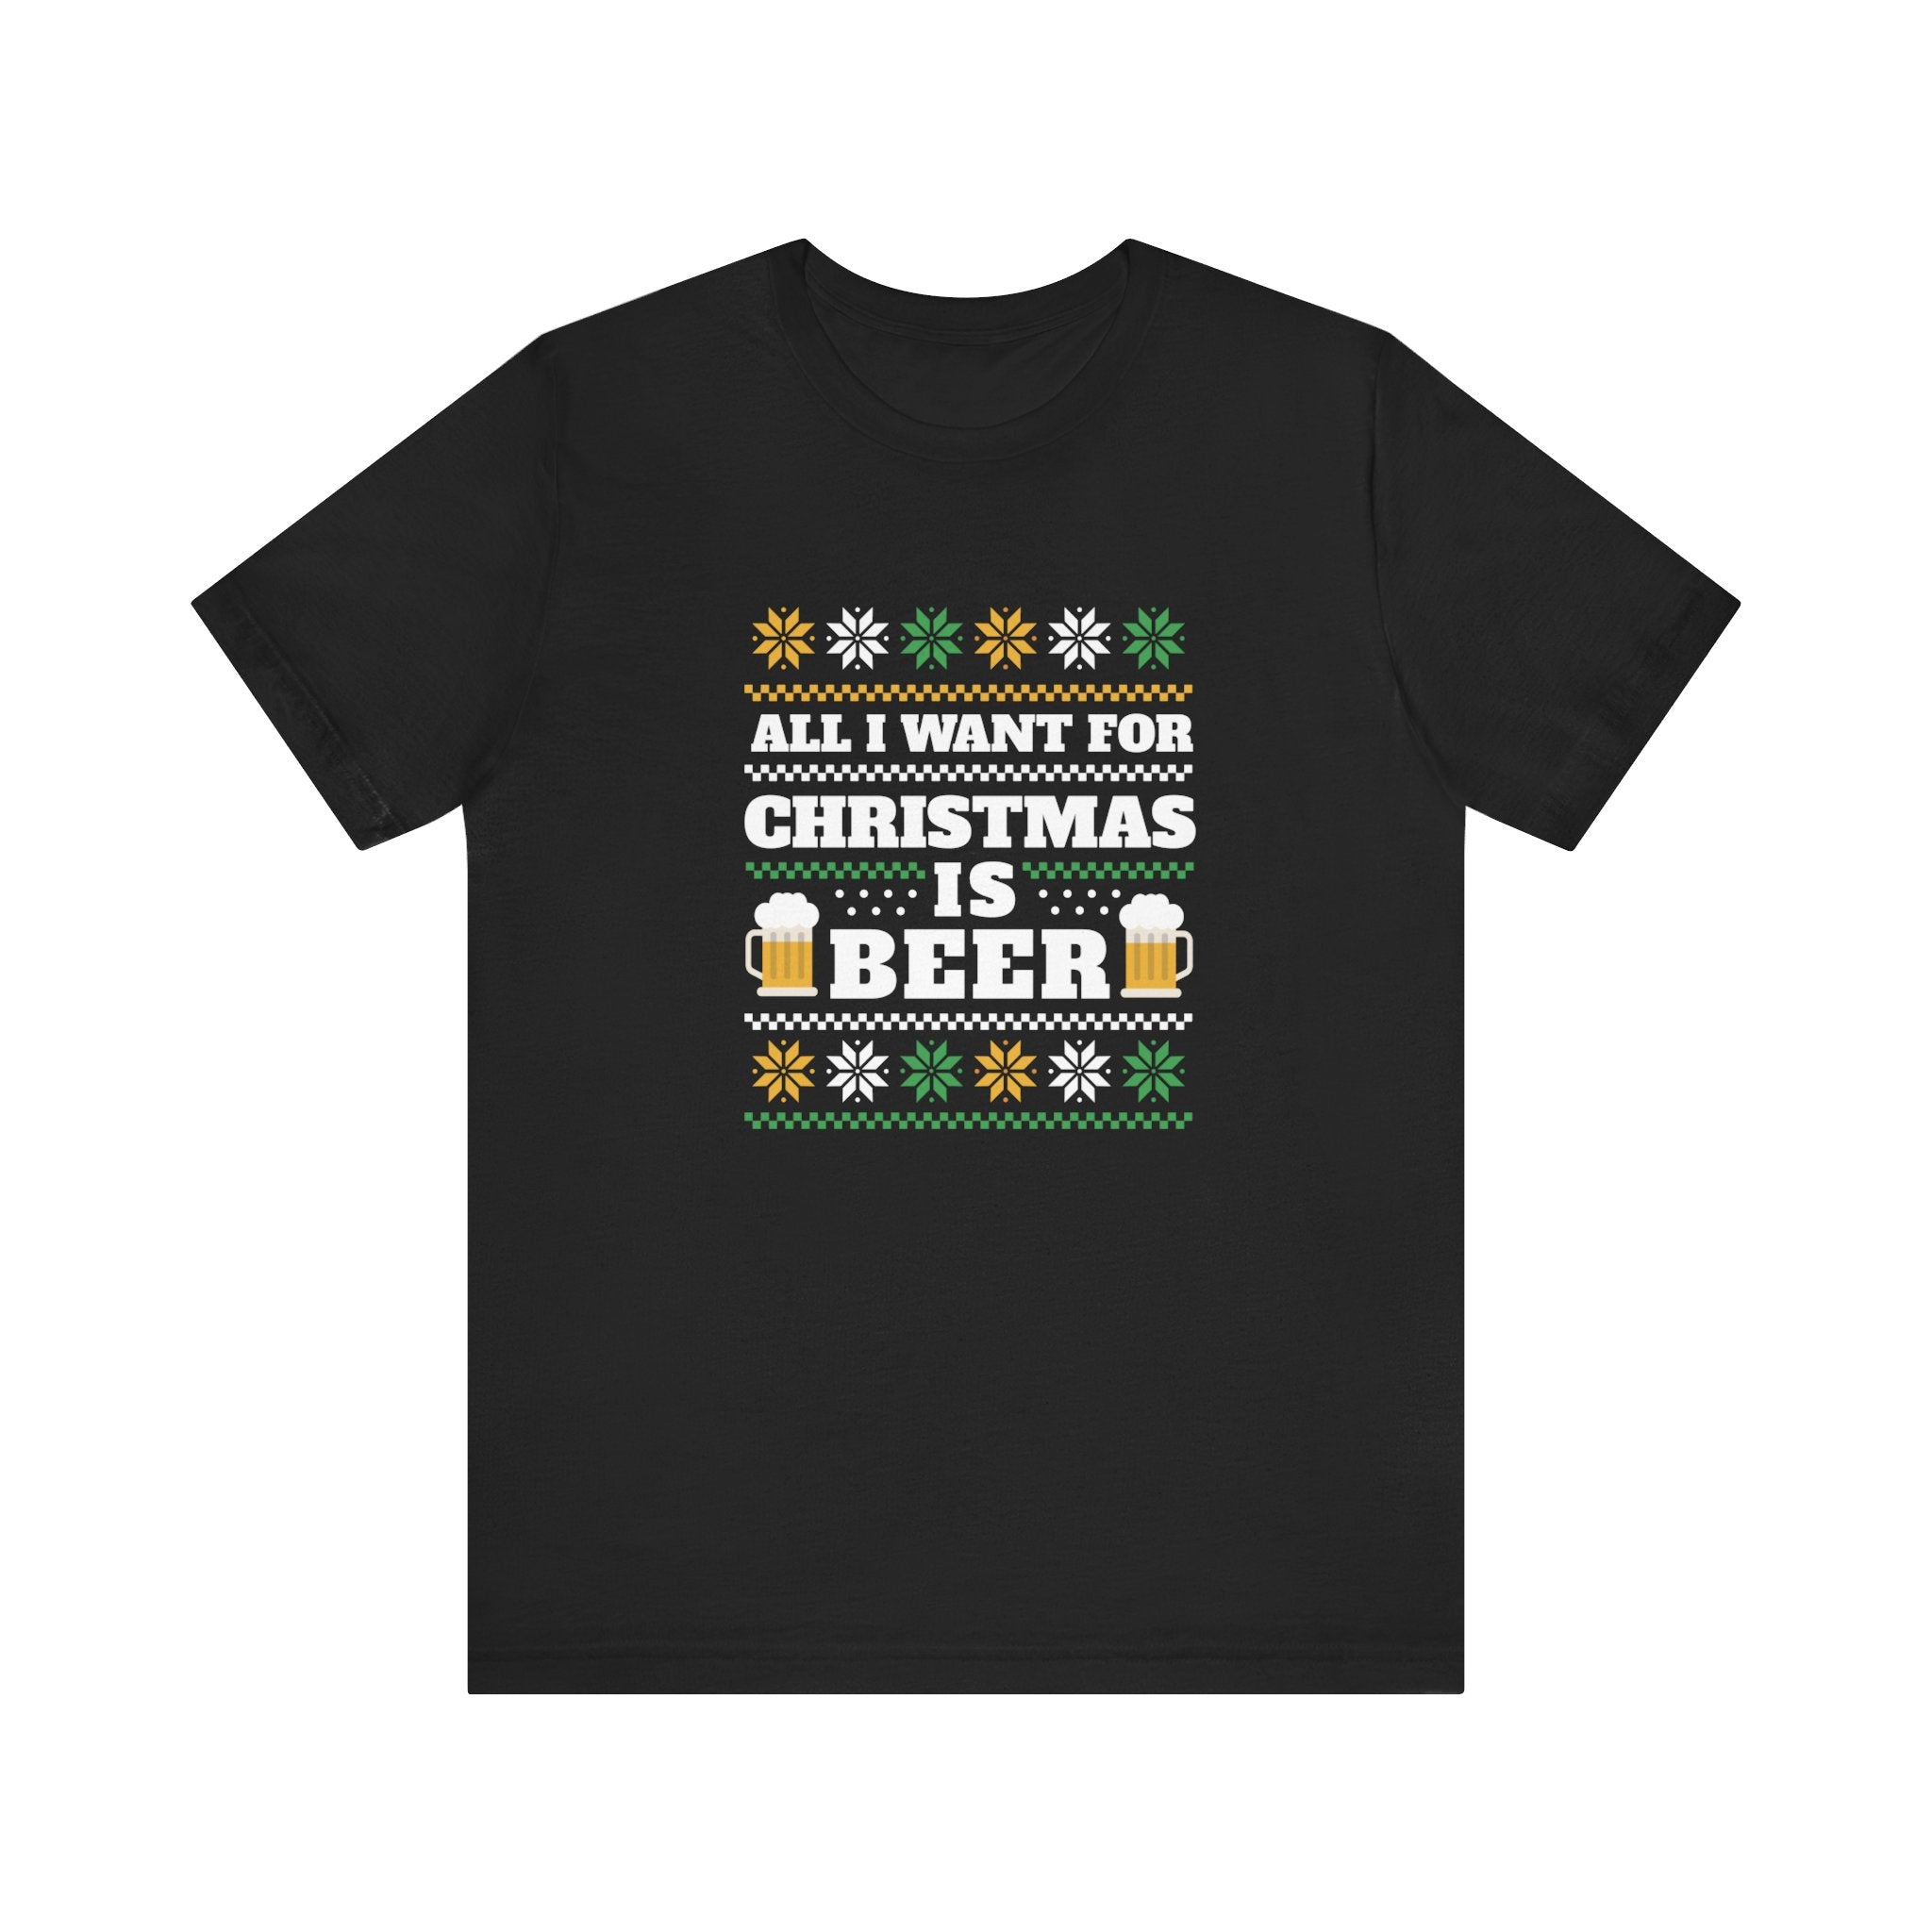 A black t-shirt in cozy Airlume cotton features the text "All I want for Christmas is Beer" in festive colors, surrounded by snowflakes and beer mug illustrations, giving it a playful **Beer Ugly Sweater - T-Shirt** vibe.